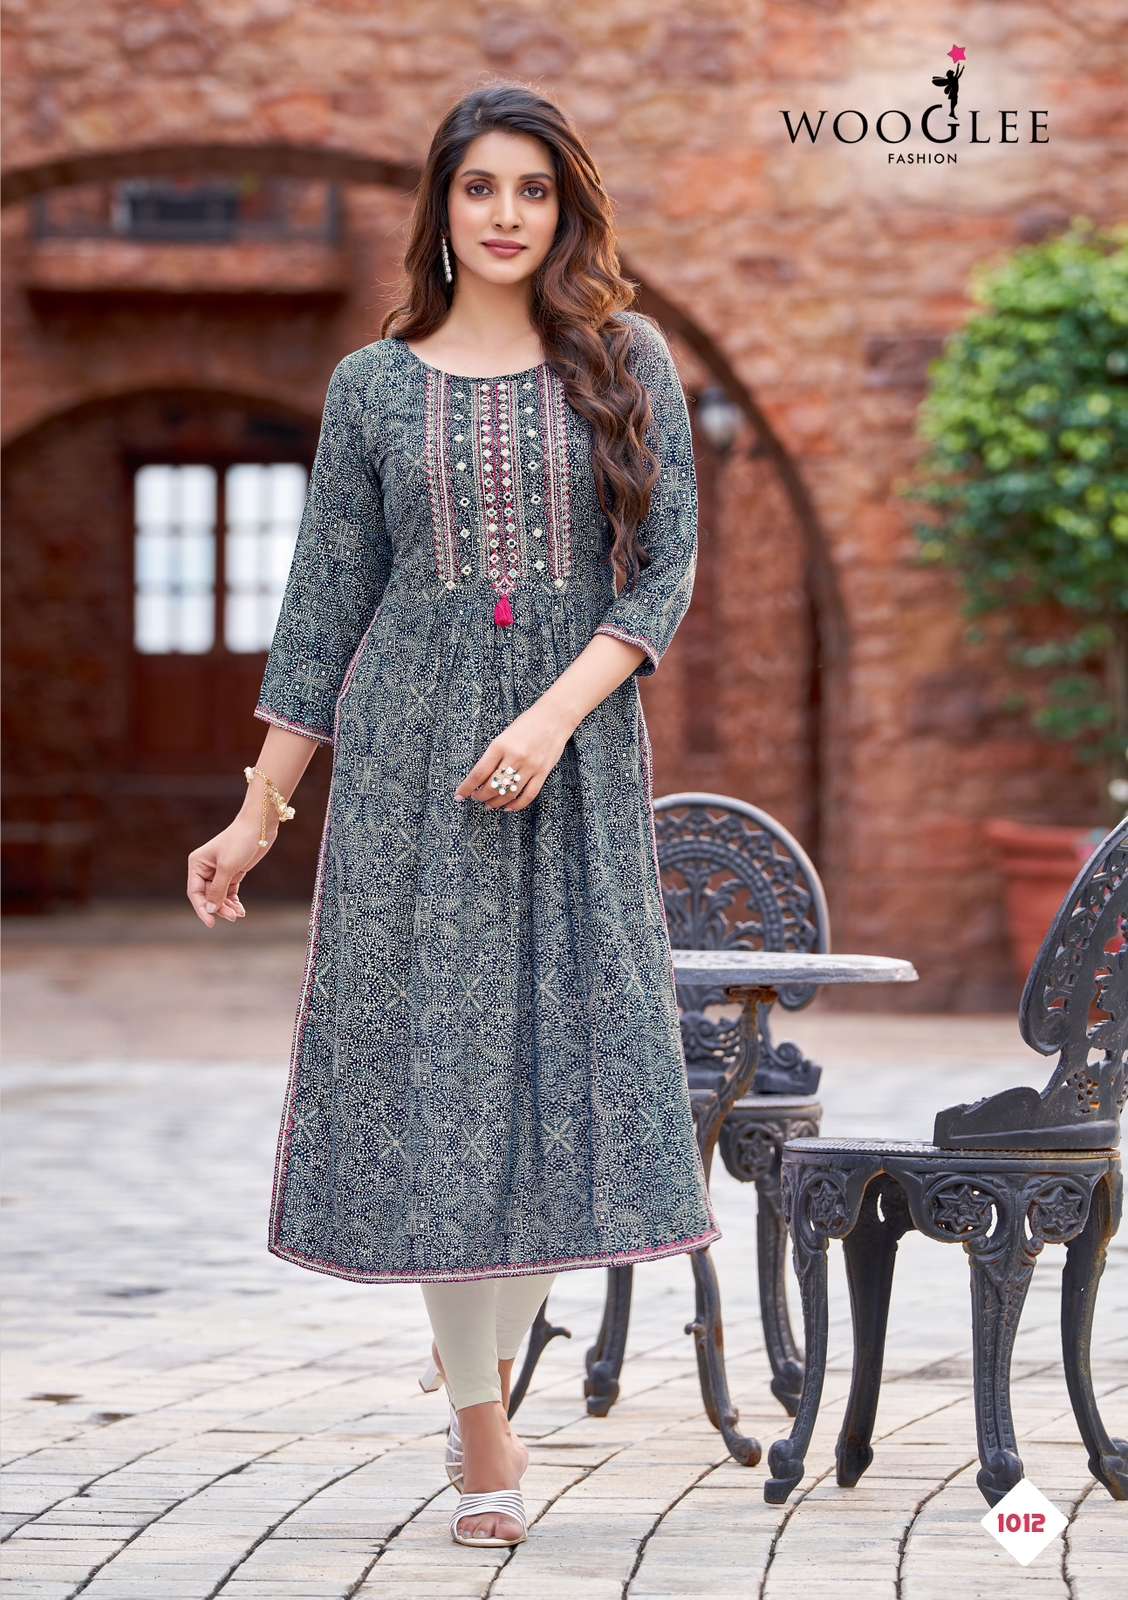 🌸Designer NEW Launch Co-erd set in Aline kurti pattern paired with Ankle  length pant giving perfect outfit and deliberate choice about… | Instagram